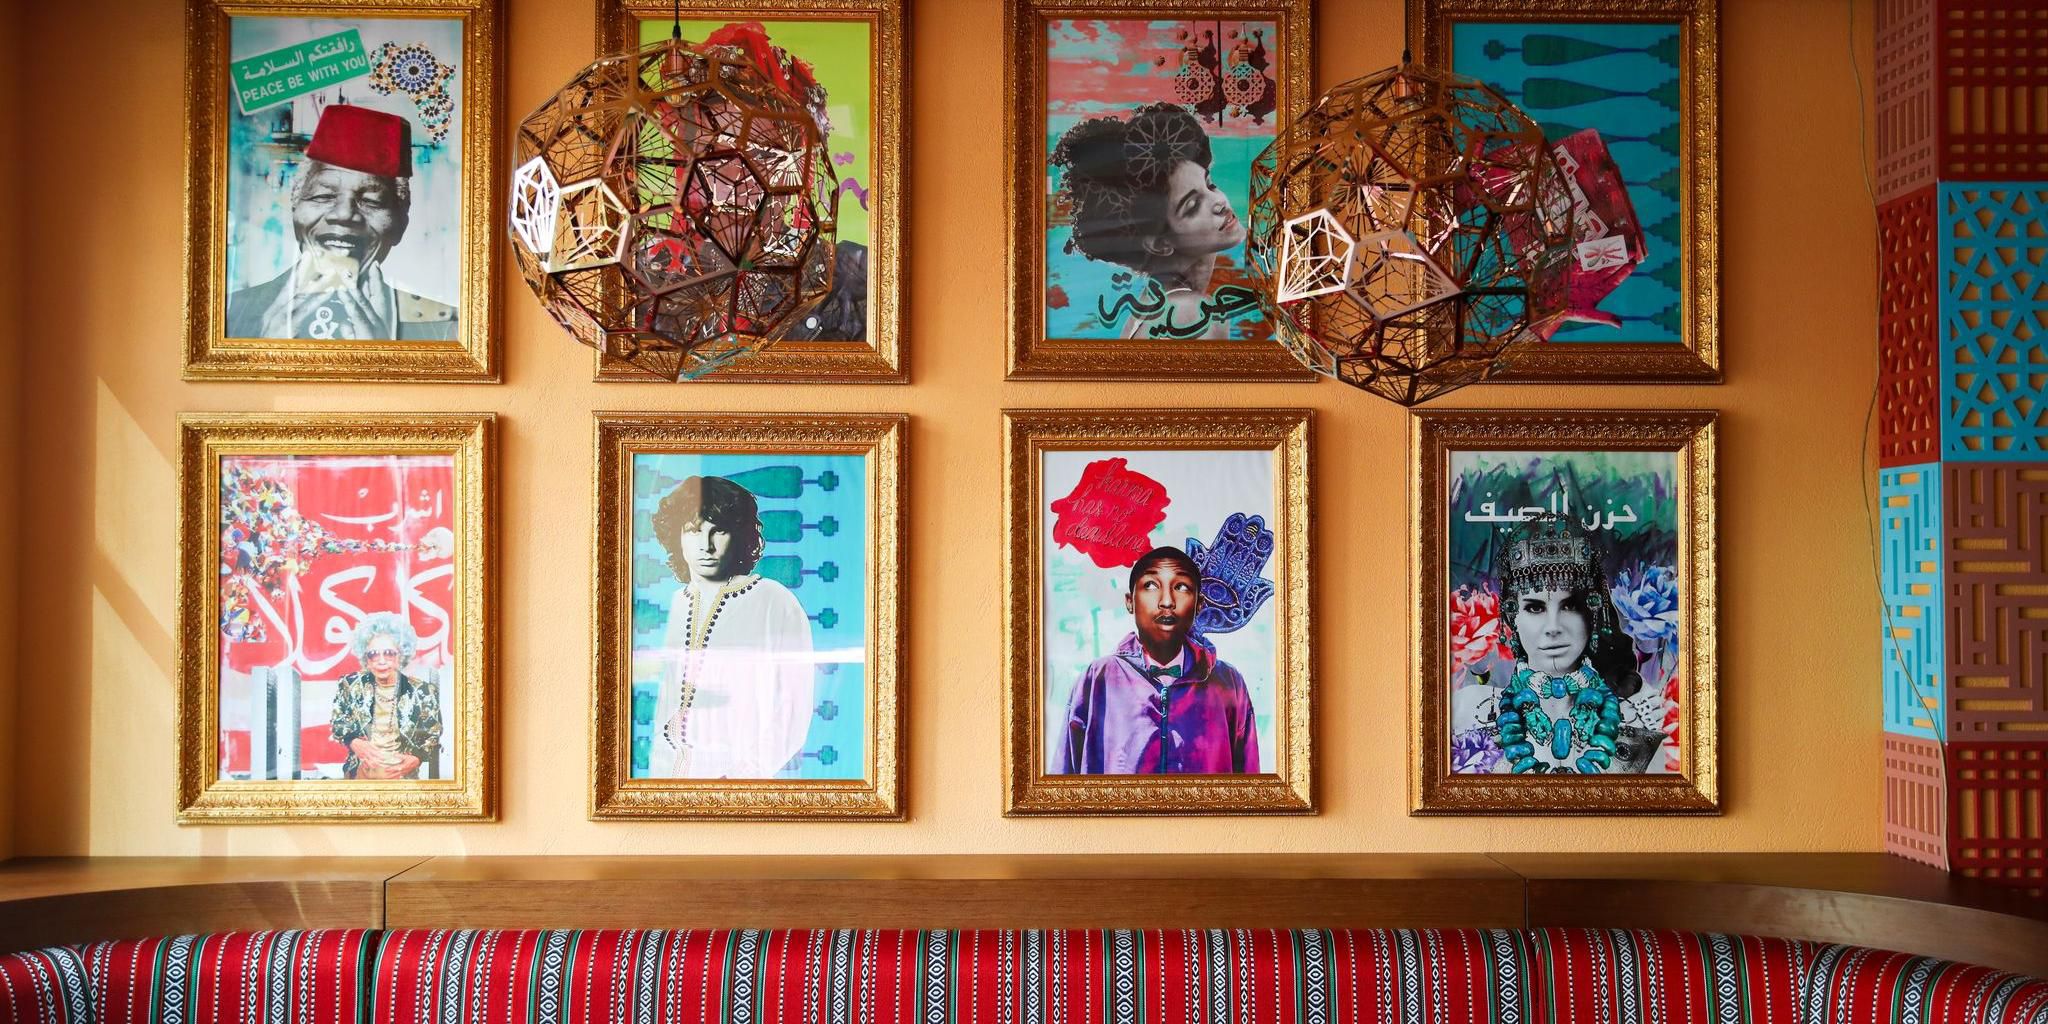 1970s vibes with art and music inside at The Cheeky Camel.